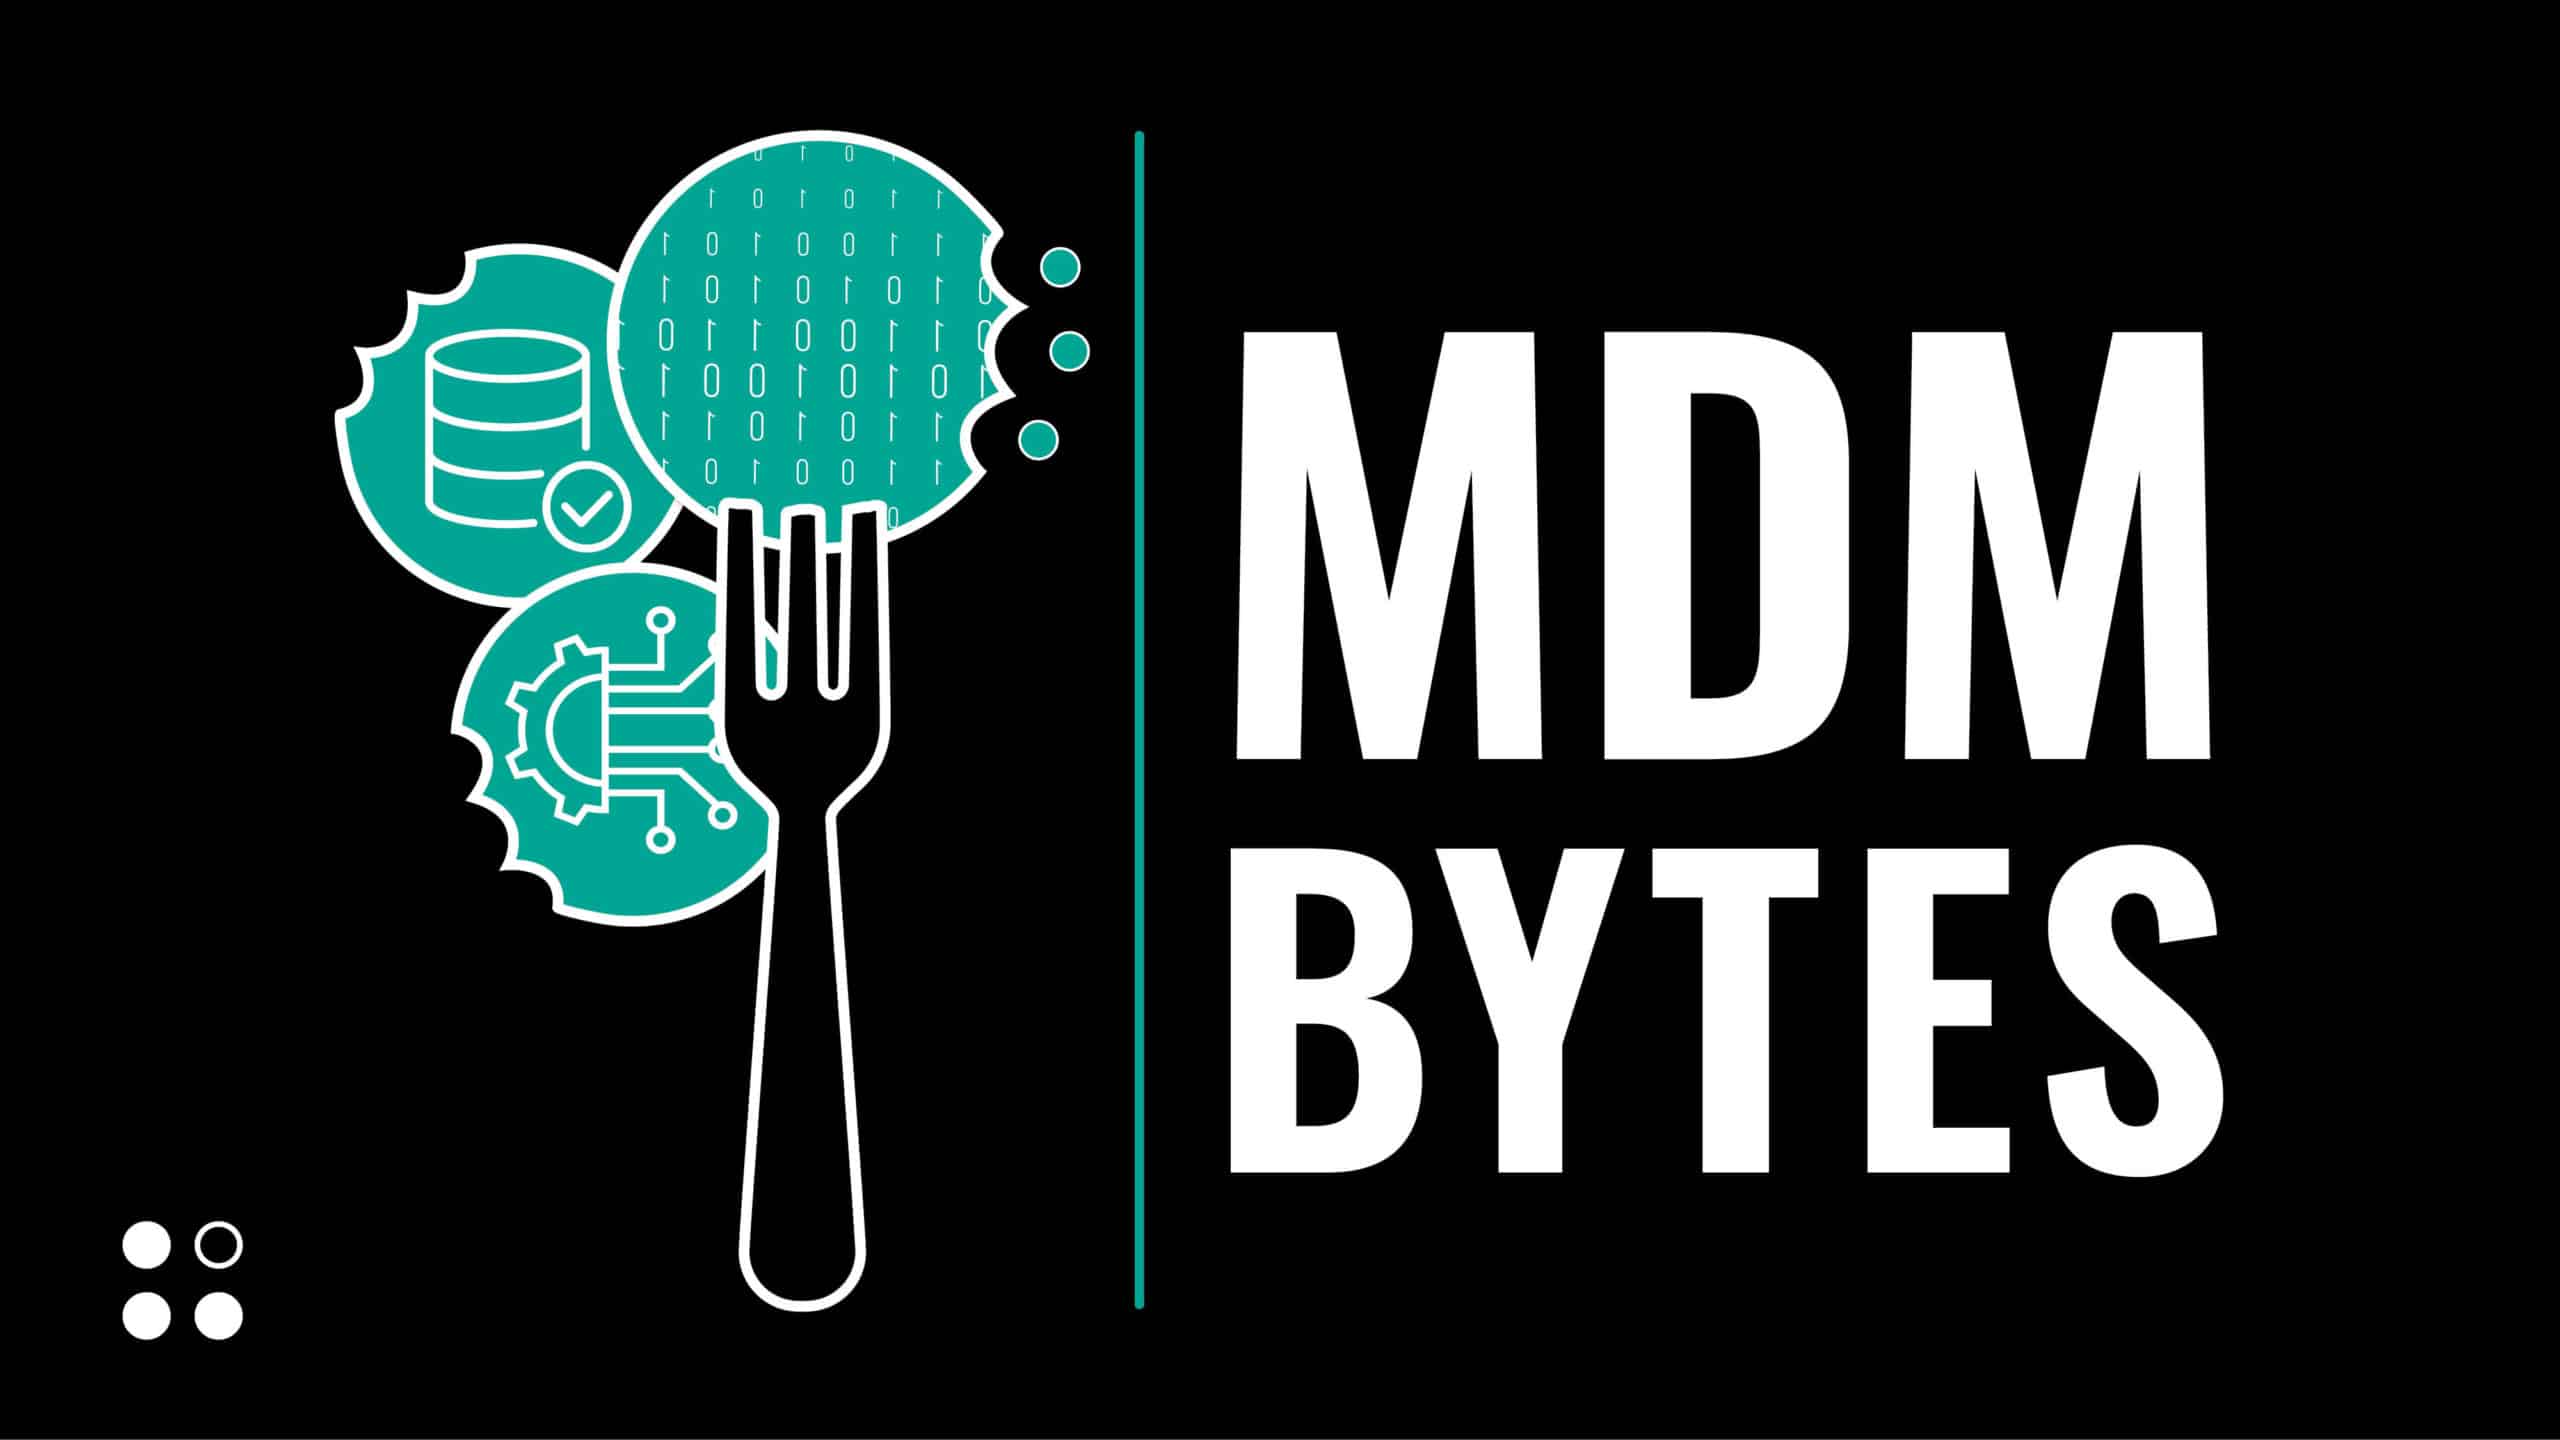 MDM Bytes: Snack-sized Insights on Master Data Management from Profisee